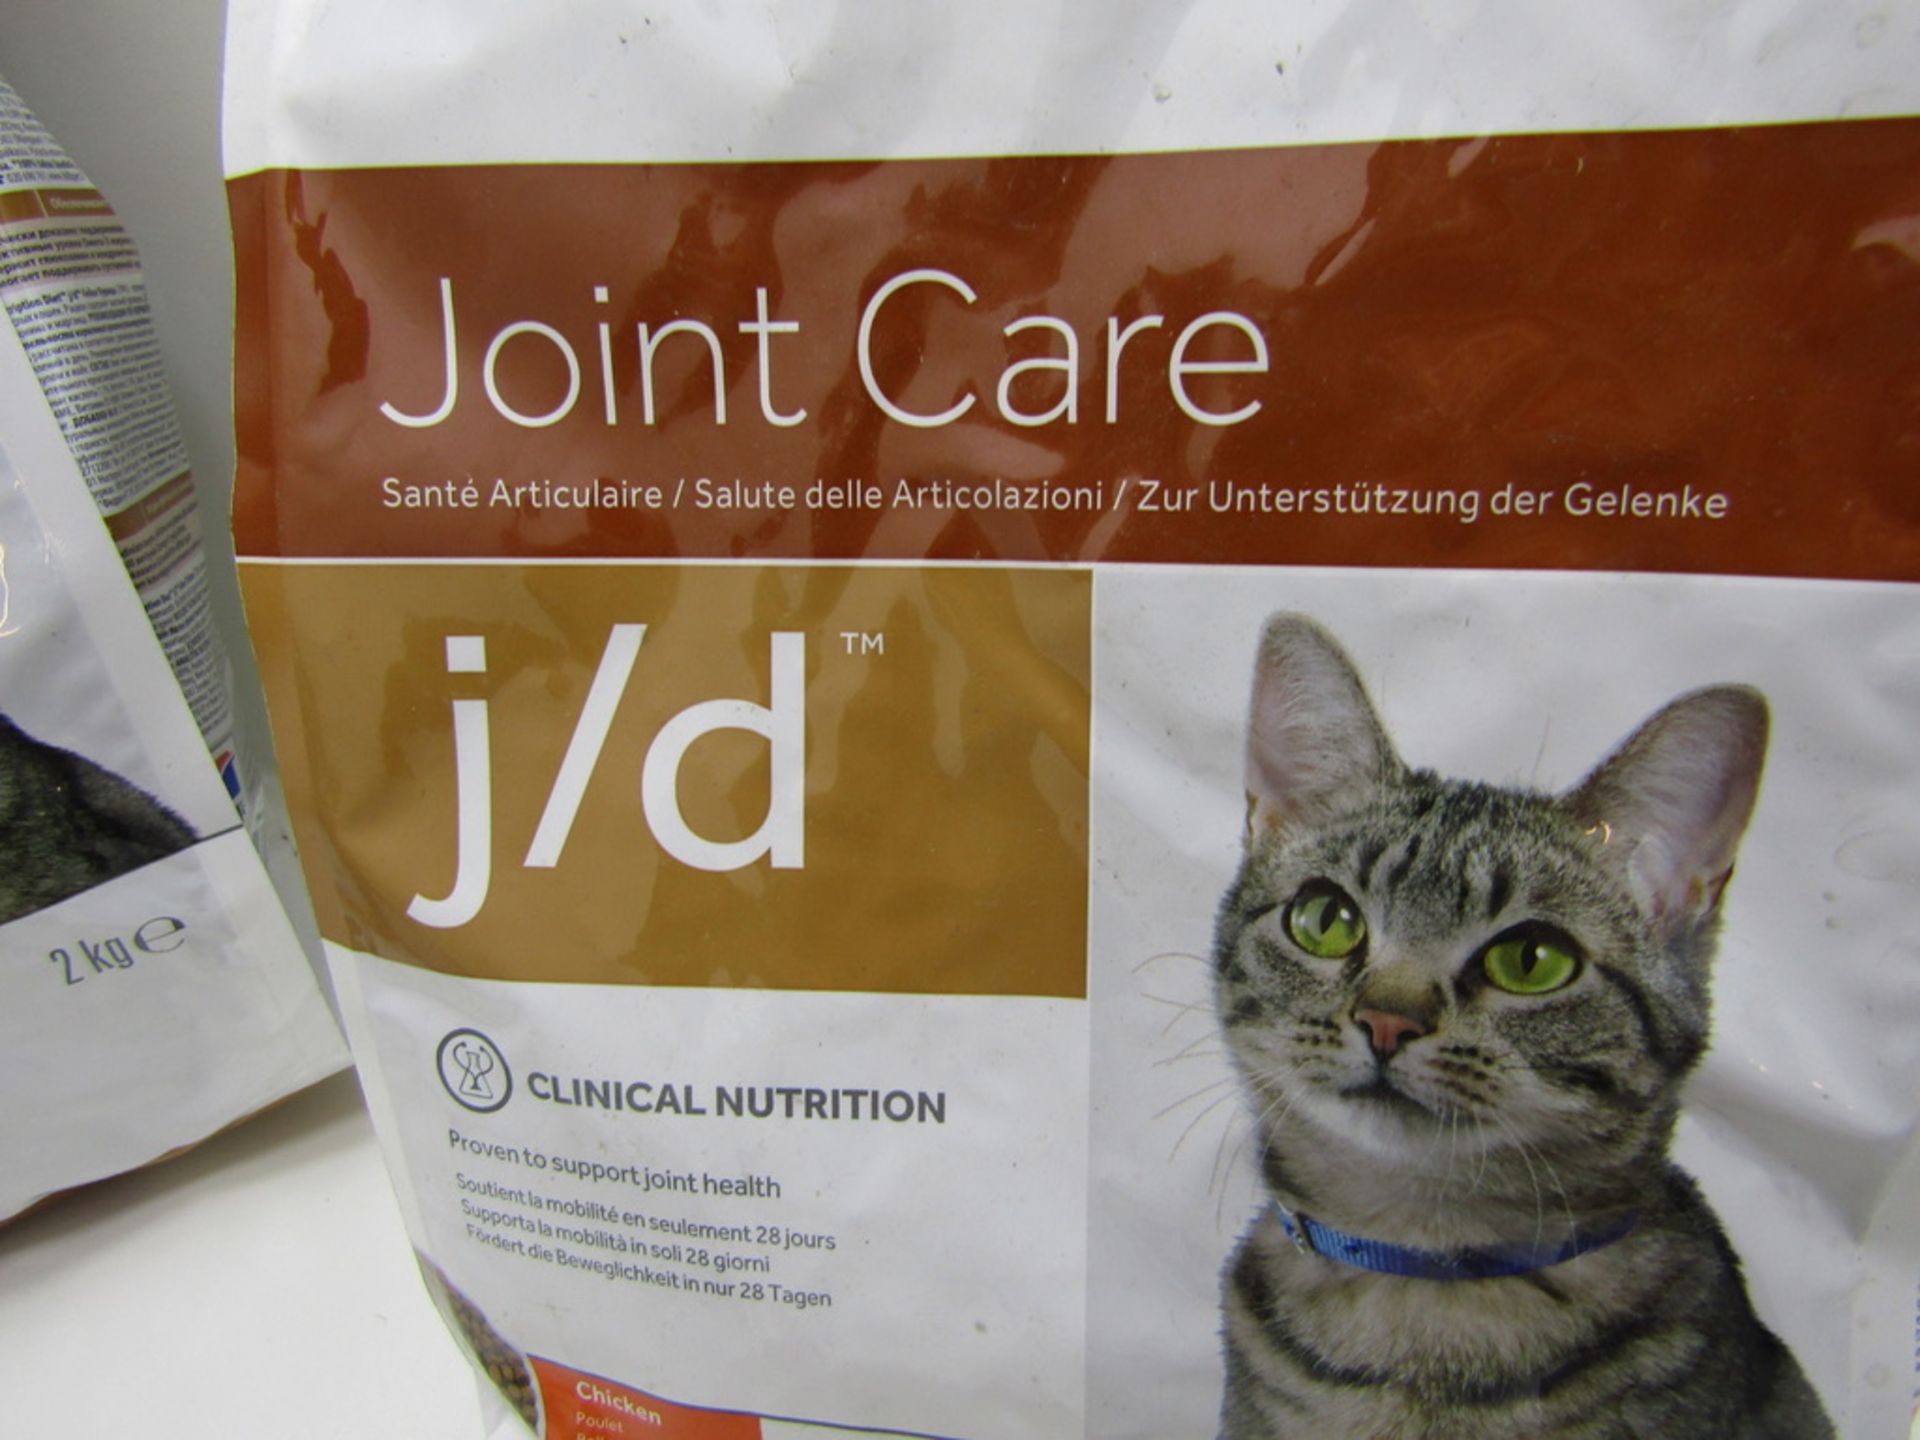 5 x Hills Prescription Diet j/d Joint Care Cat Food. Dry with Chicken 2kg each - Image 2 of 5